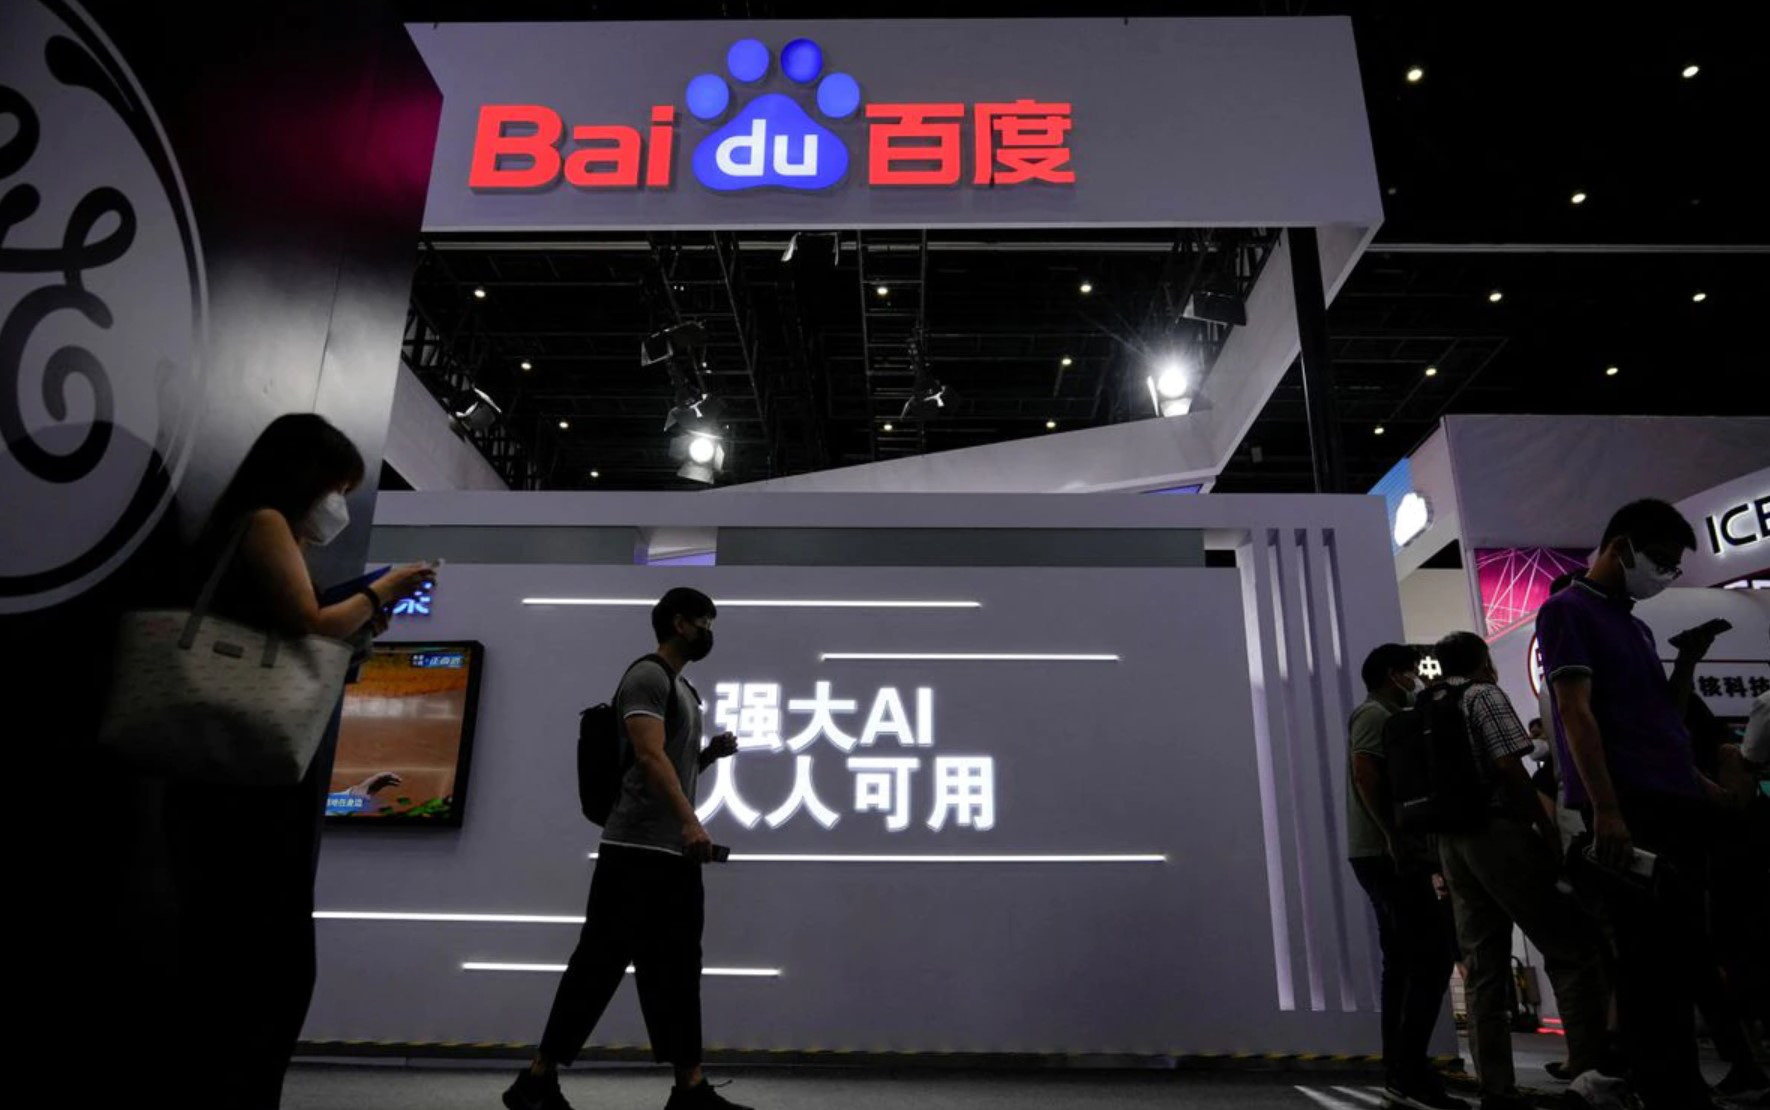 The Chinese search giant has also jumped on the wave of AI chatbot applications like ChatGPT - Photo: REUTERS